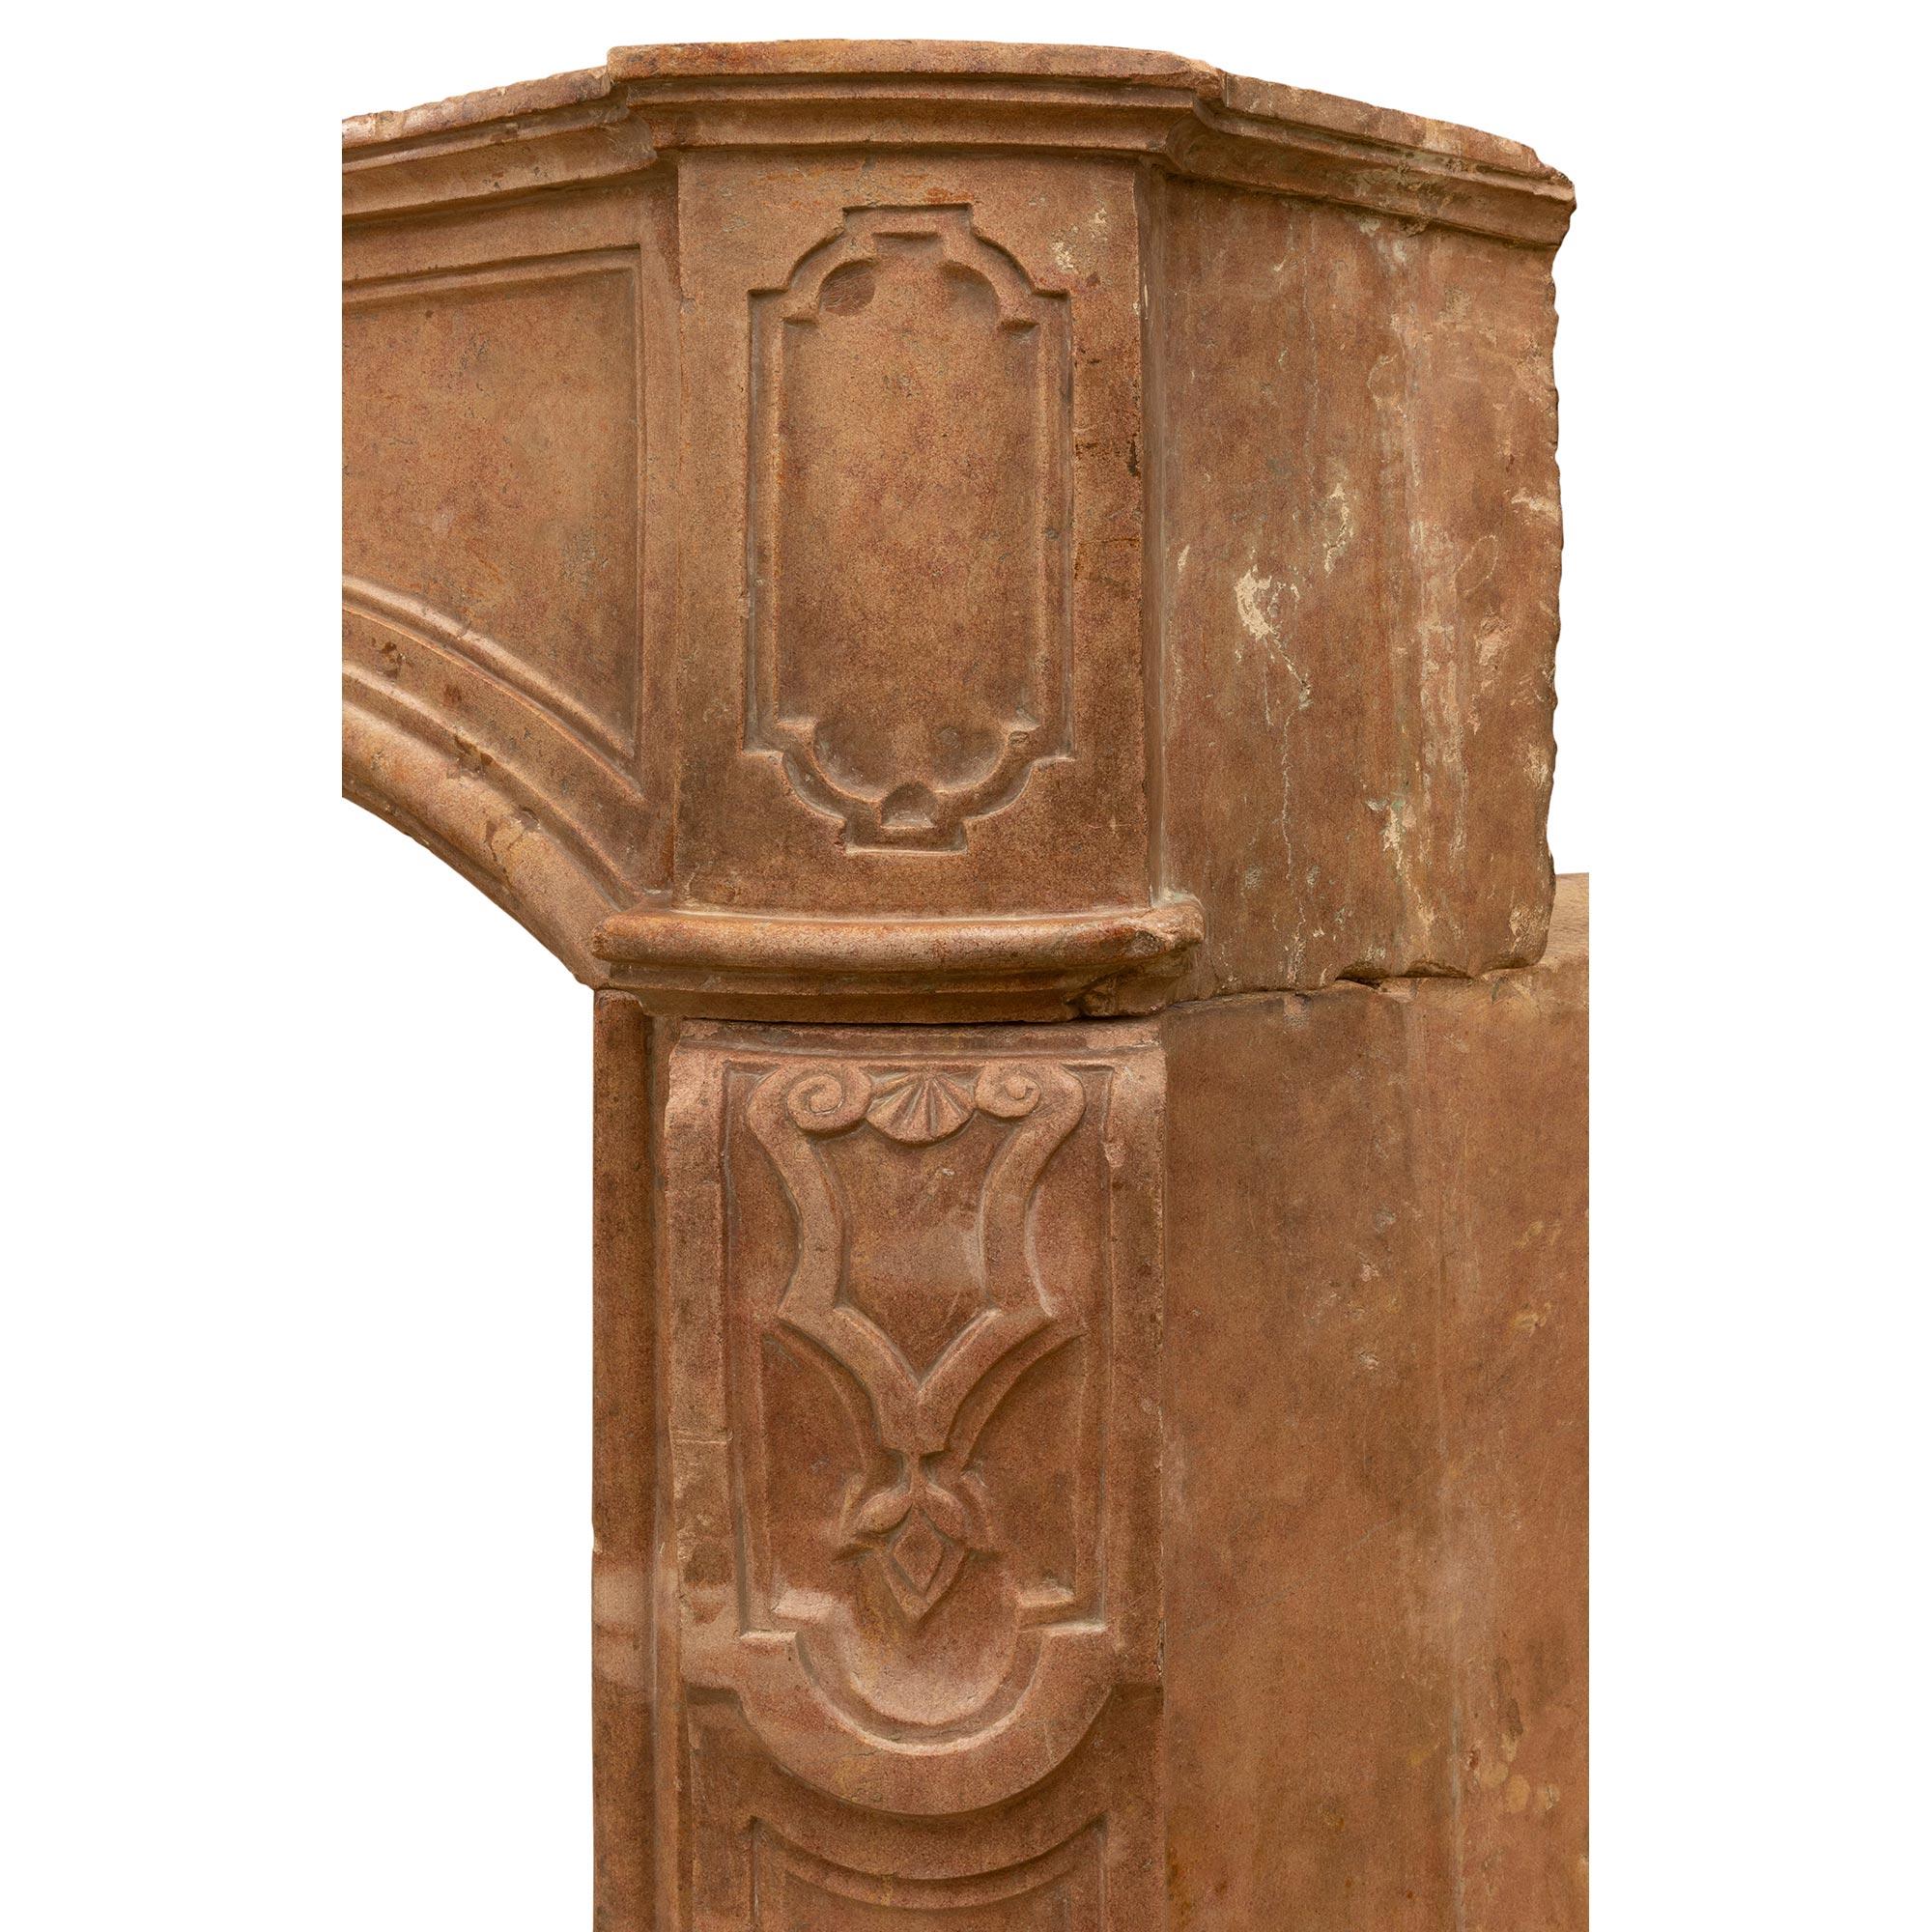 French 17th Century Renaissance Period Pierre De Bourgogne Fireplace Mantel In Good Condition For Sale In West Palm Beach, FL